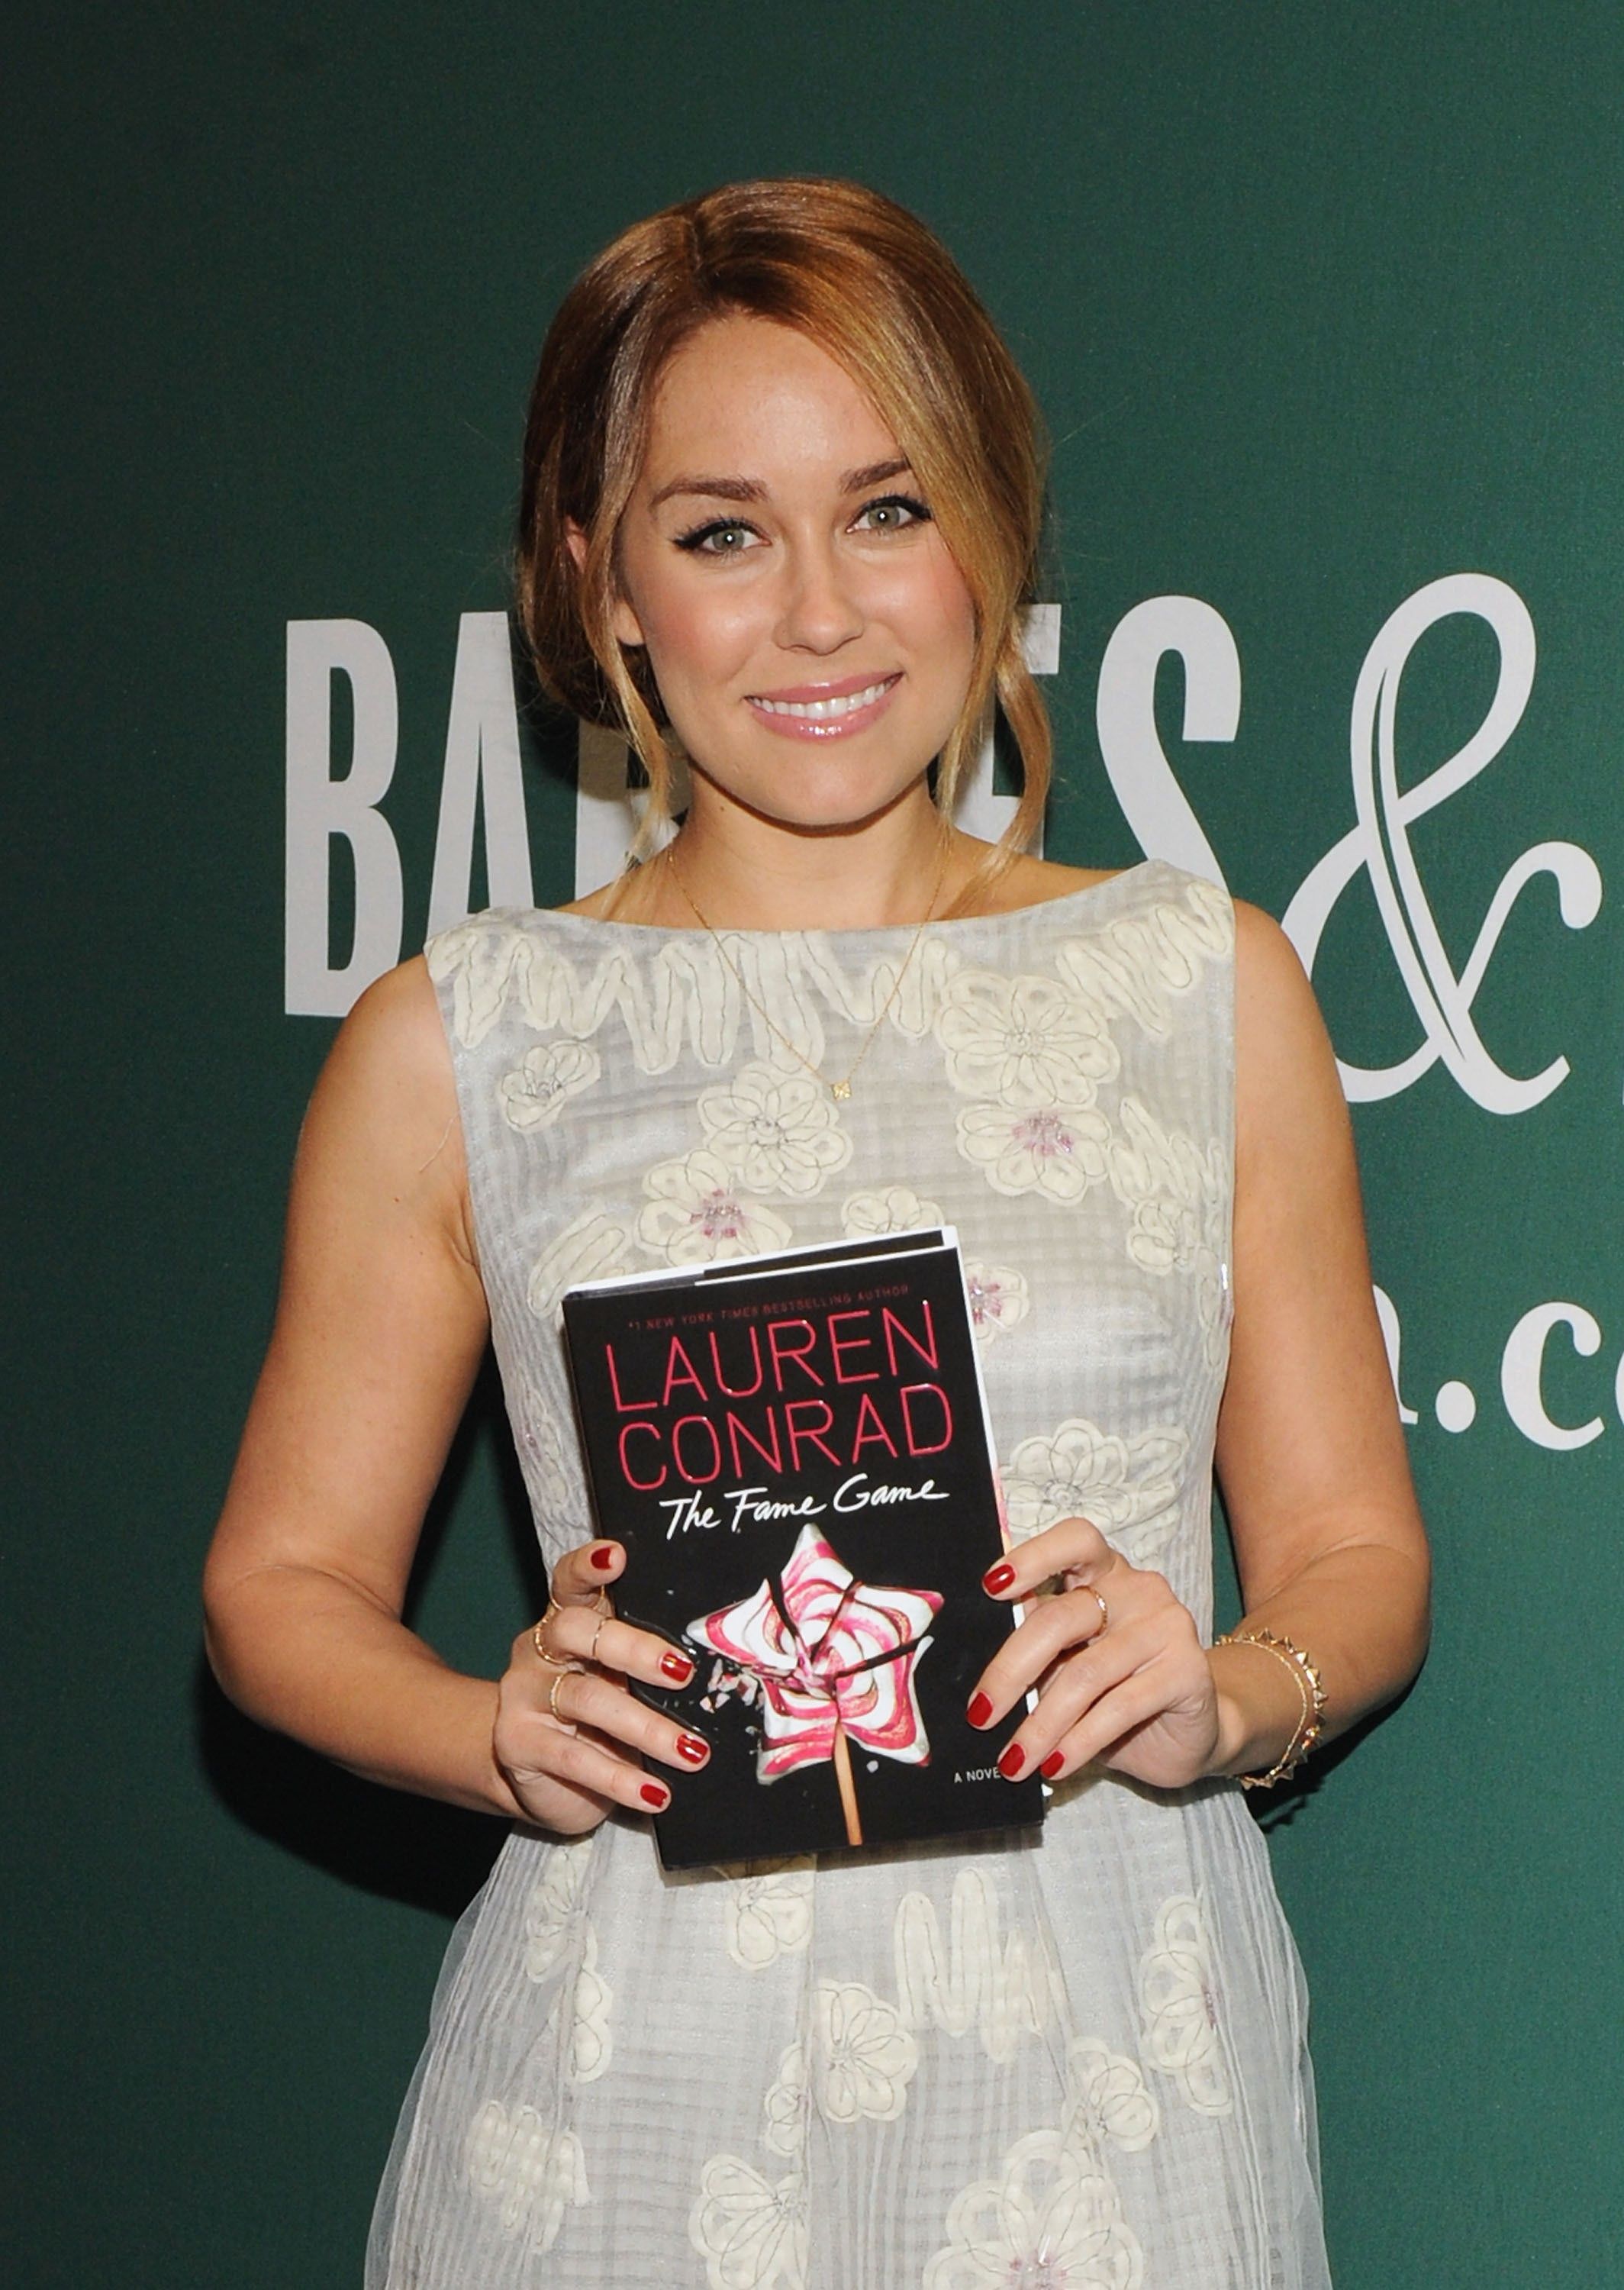 Lauren Conrad bans body-shaming words from her website including